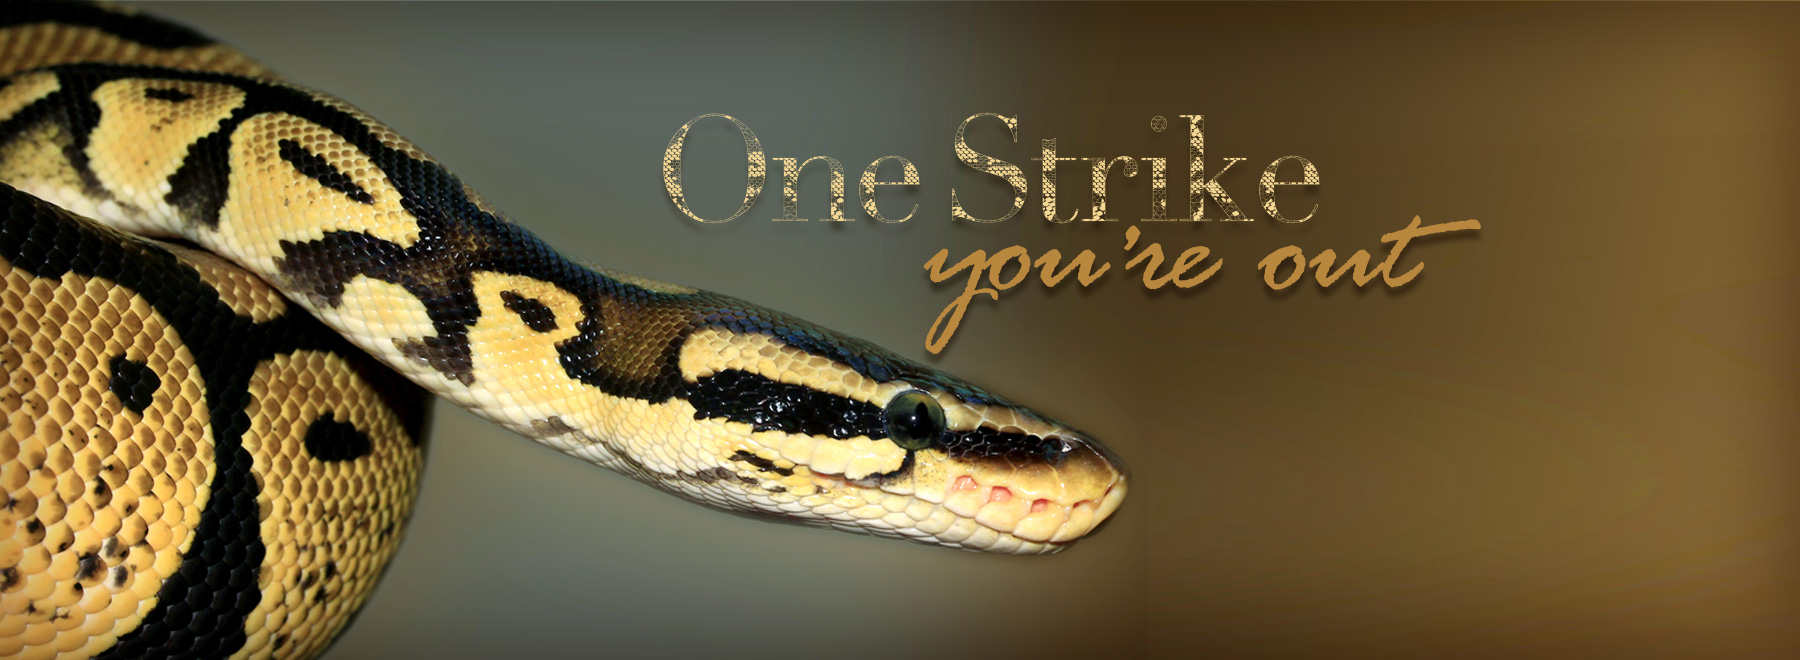 Snake story top, image of cottonmouth snake with story title